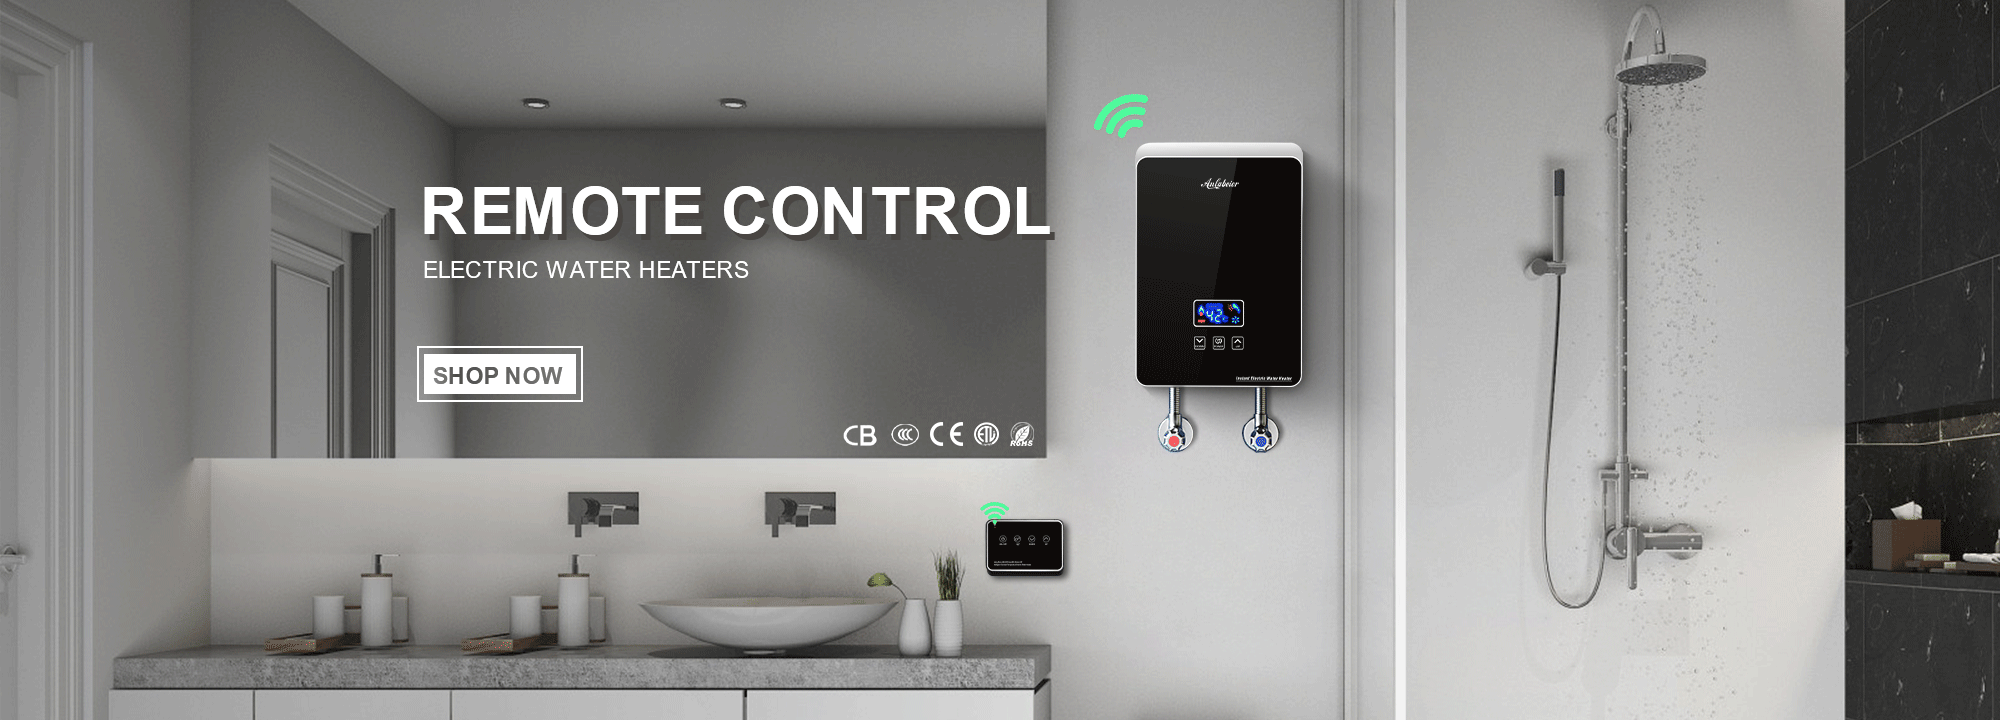 REMOTE CONTROL WATER HEATER